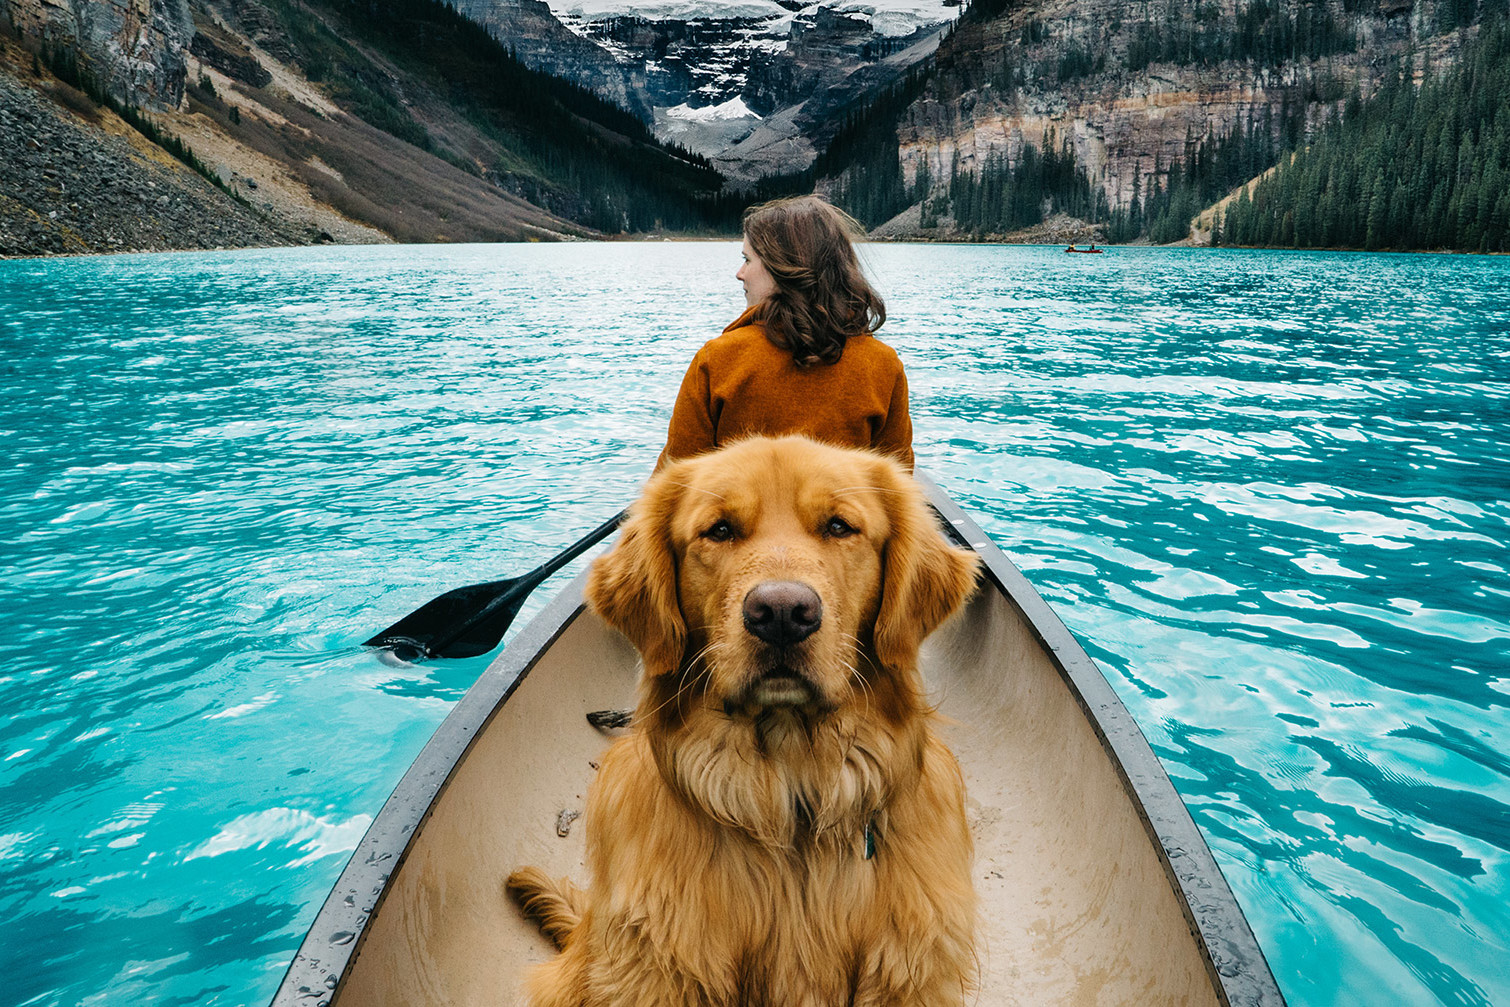 woman canoeing in mountains with dog looking angrily into camera